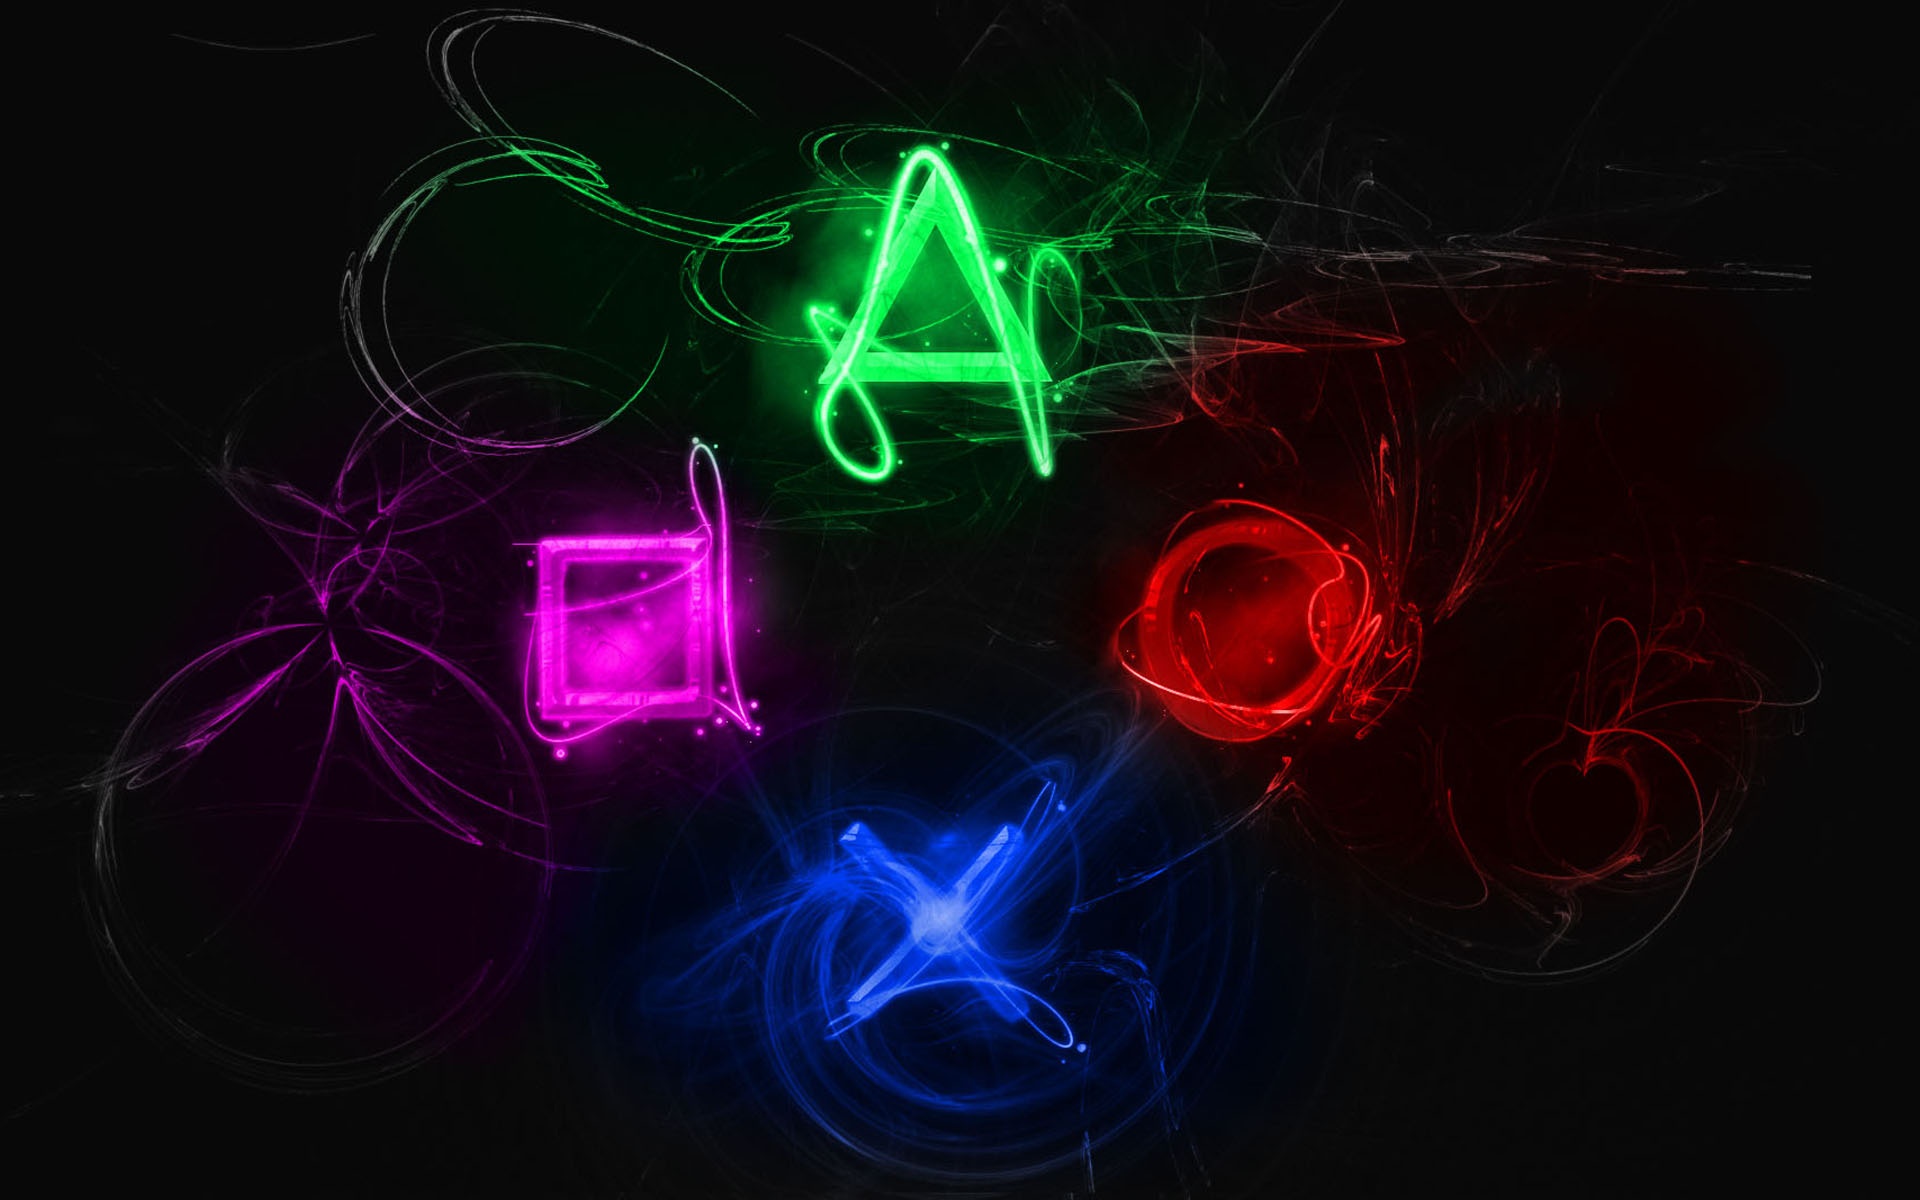 Sony Psp Firmware Ppdates - HD Wallpapers Widescreen - 1920x1200